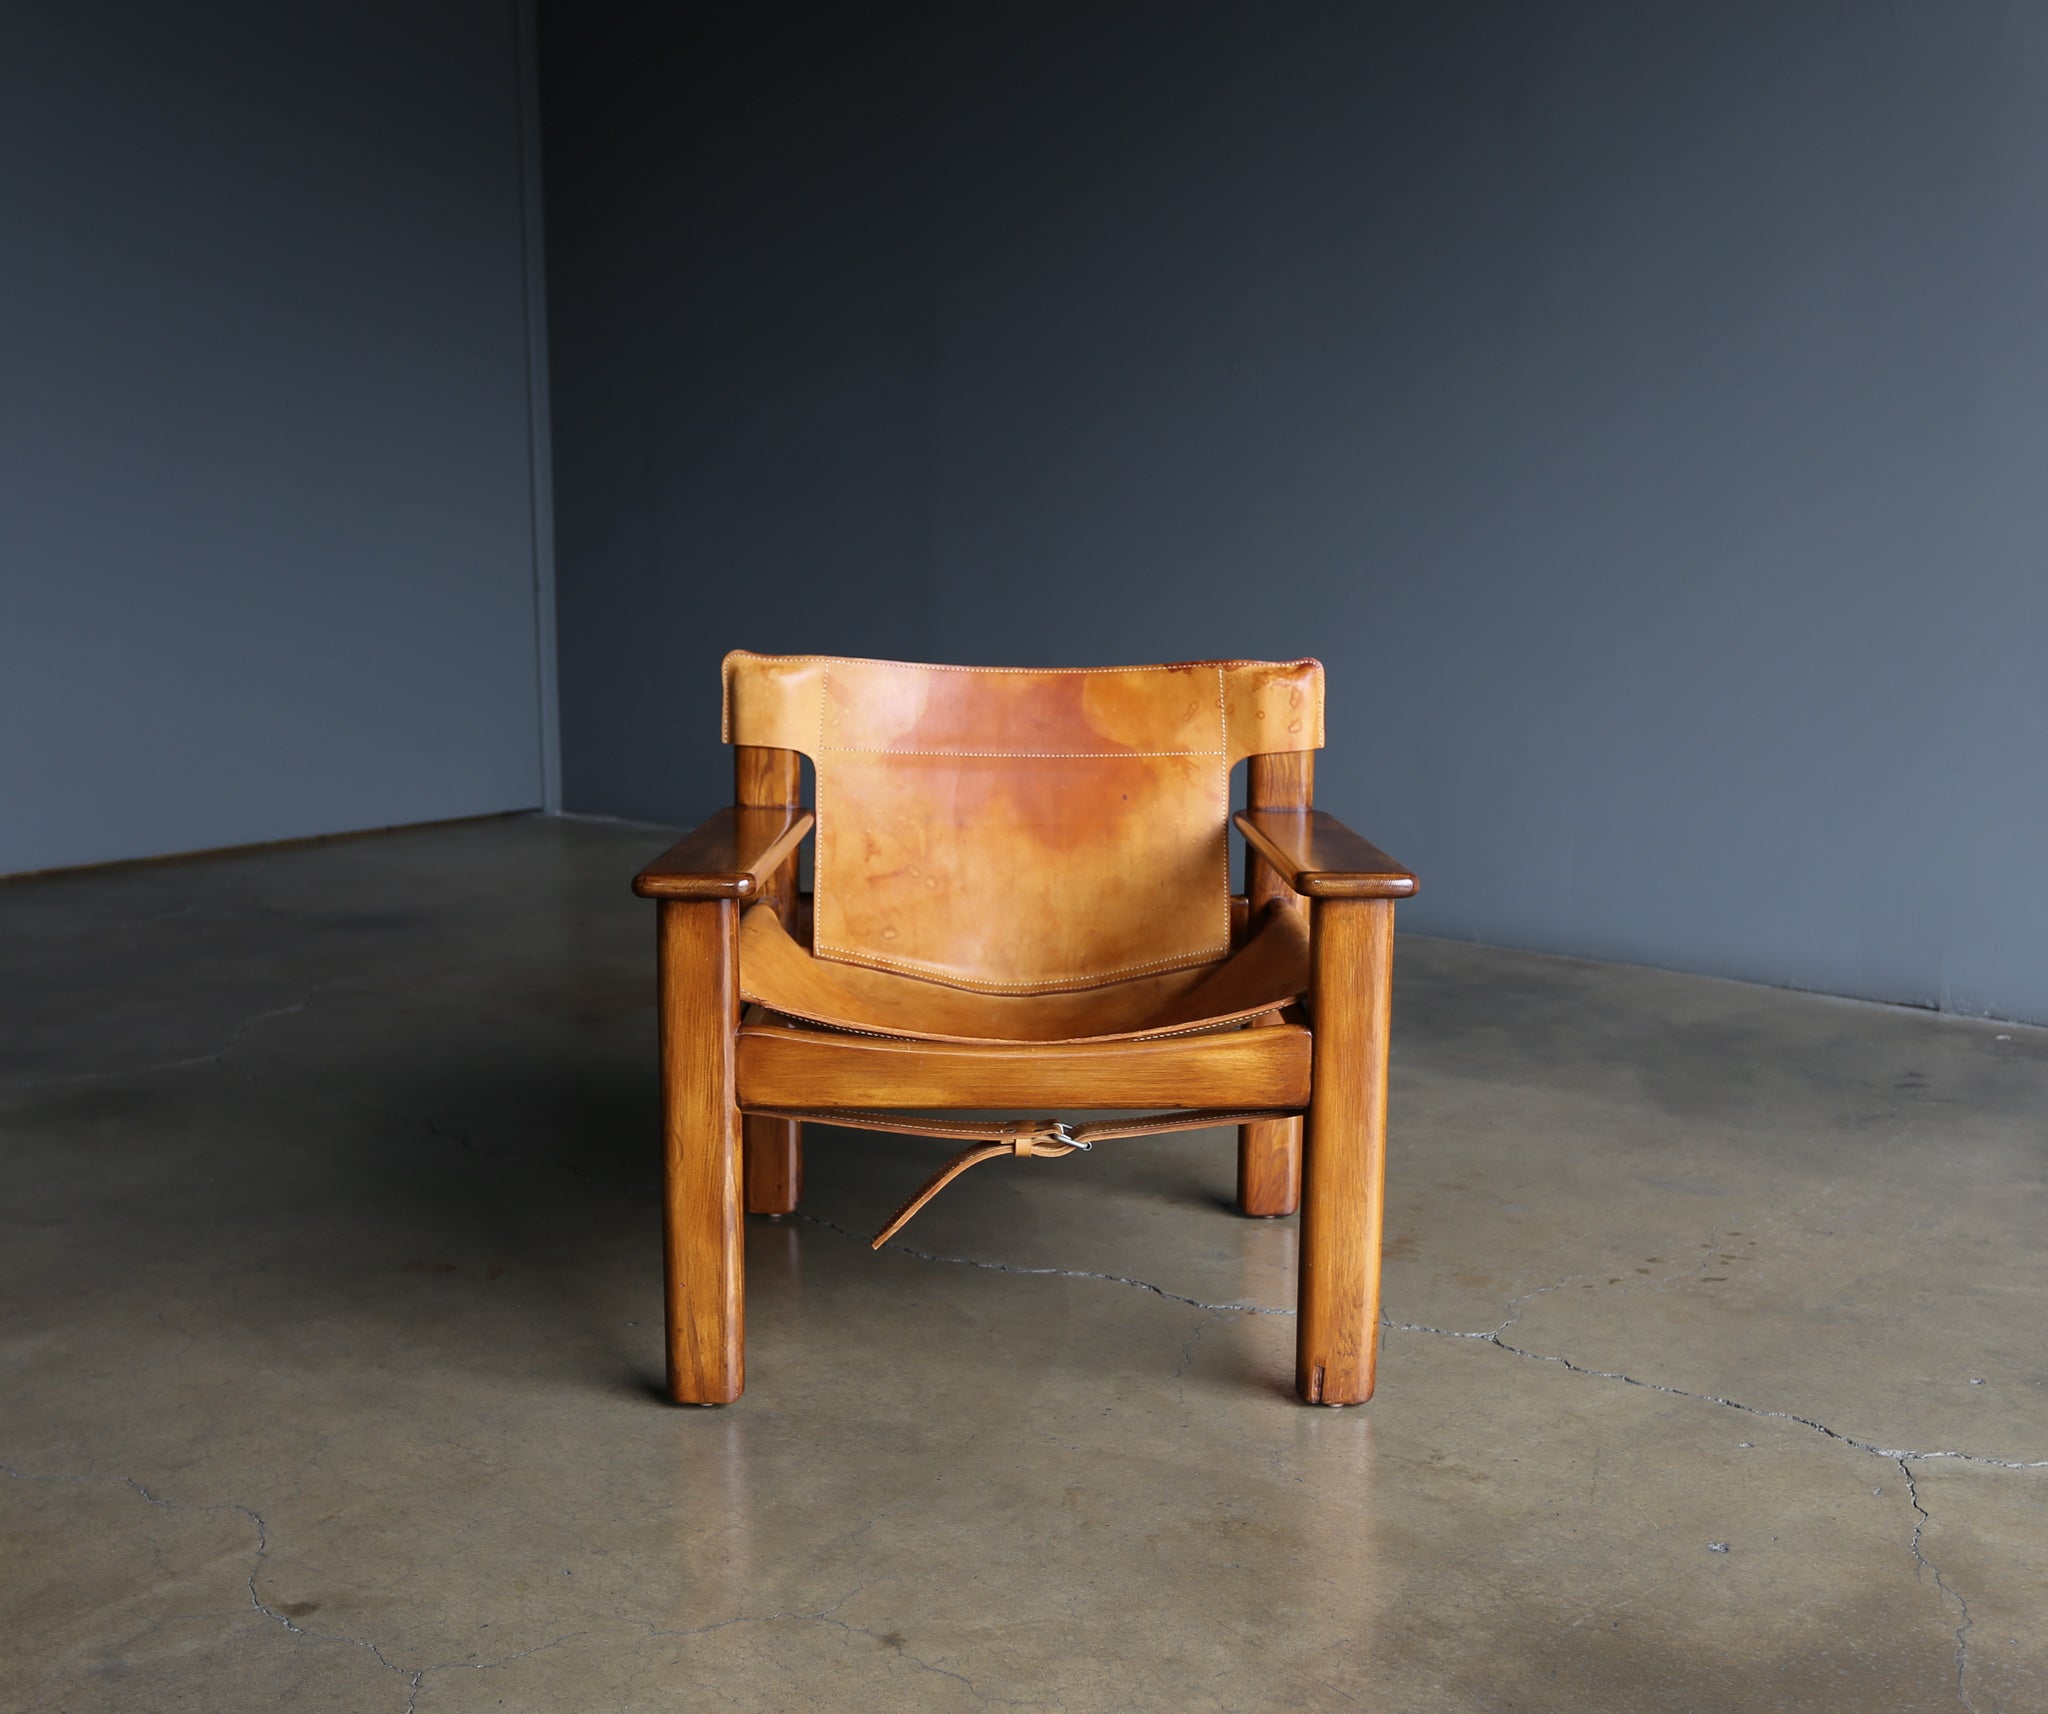 = SOLD = Karin Mobring 'Natura' Saddle Leather & Pine Lounge Chairs for IKEA, circa 1970